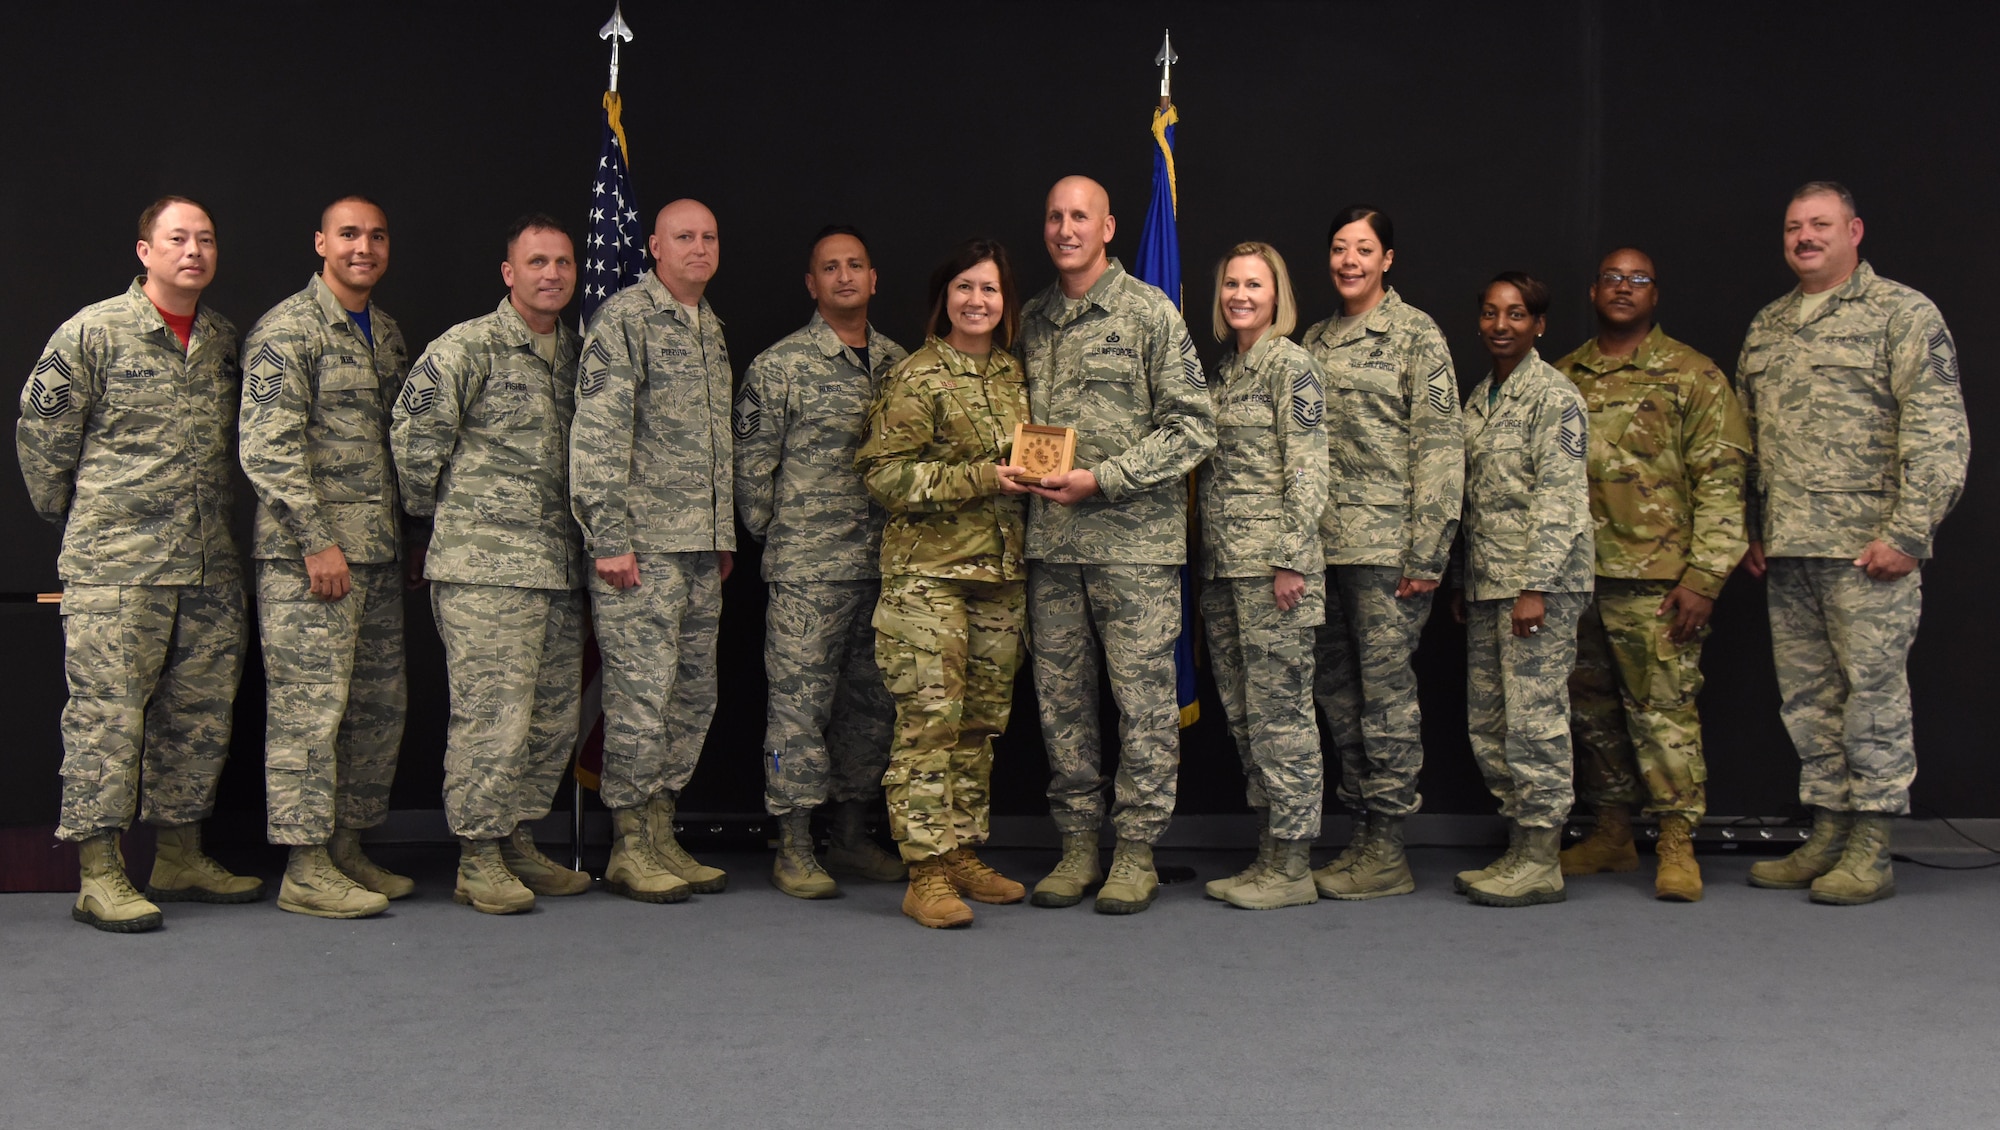 U.S. Air Force Chief Master Sgt. JoAnne Bass, 2nd Air Force command chief, is joined by Keesler chief master sergeants to present Chief Master Sgt. Kenneth Carter, 81st Training Wing command chief, with a momento during his retirement farewell reception at Keesler Air Force Base, Mississippi, Nov. 2, 2018. Carter retired with more than 29 years of military service. (U.S. Air Force photo by Kemberly Groue)